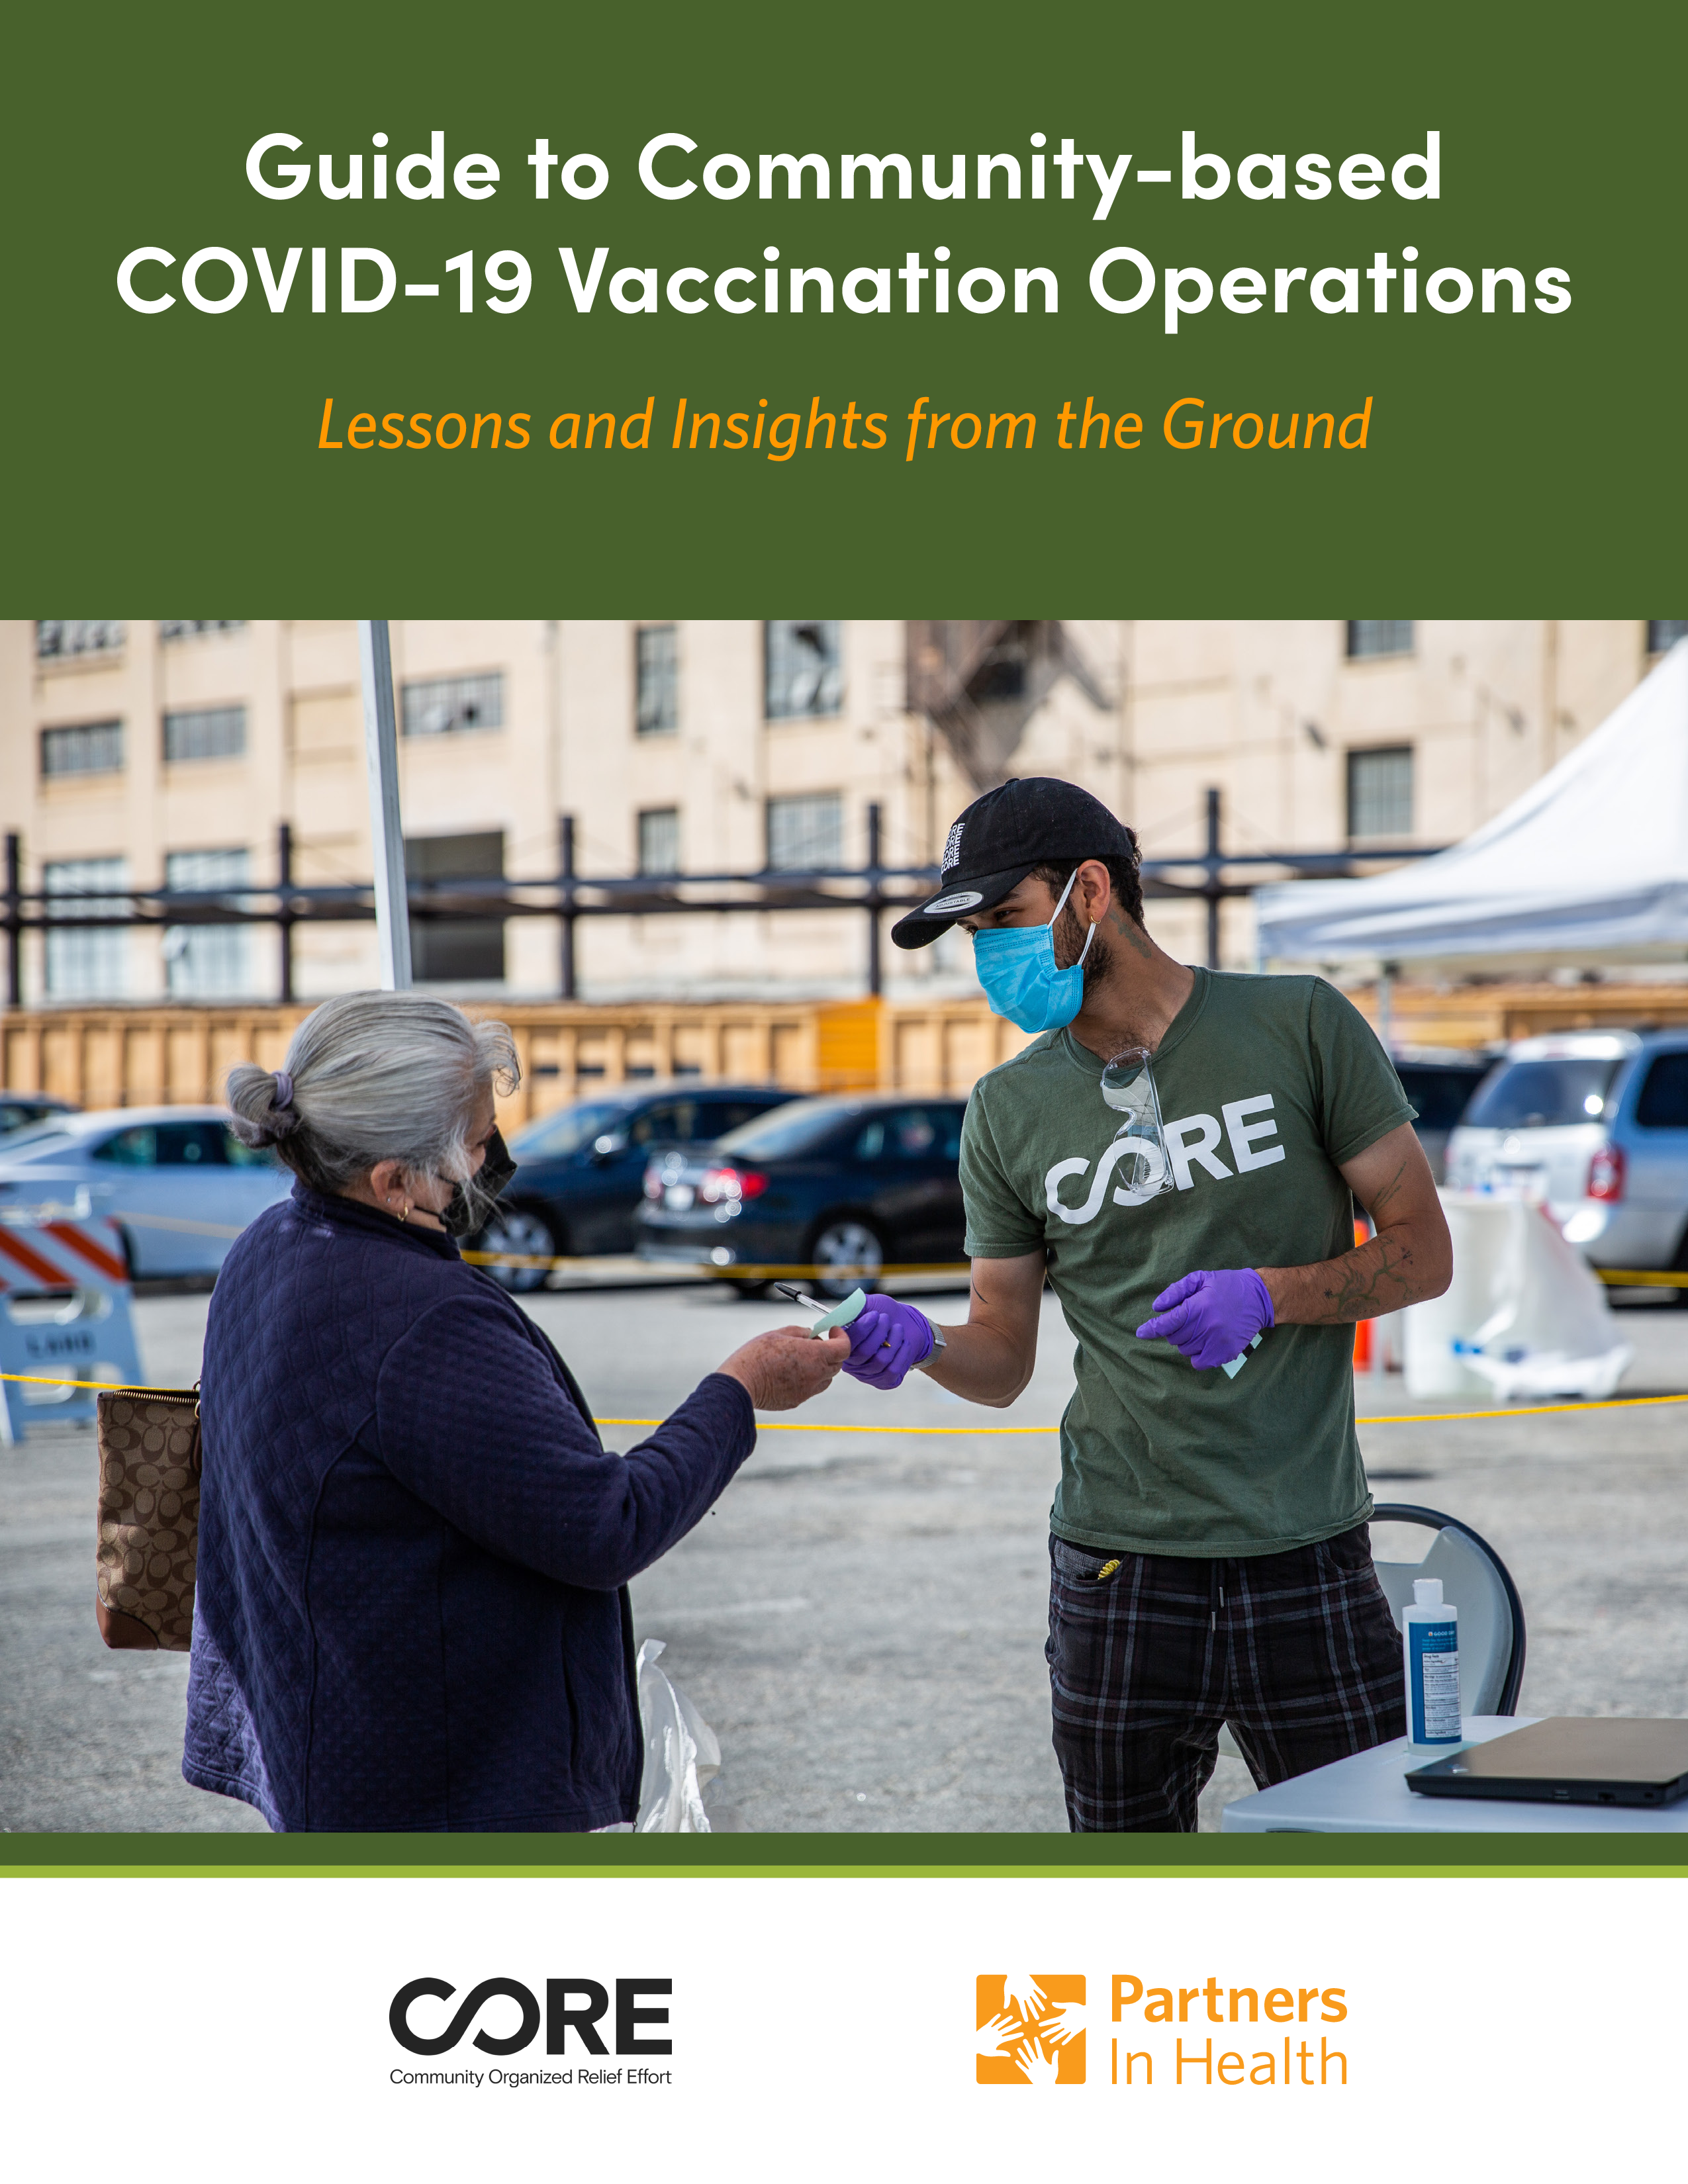 Title page of the report. A vaccine drive worker wearing a CORE shirt is shown assisting an attendee. 